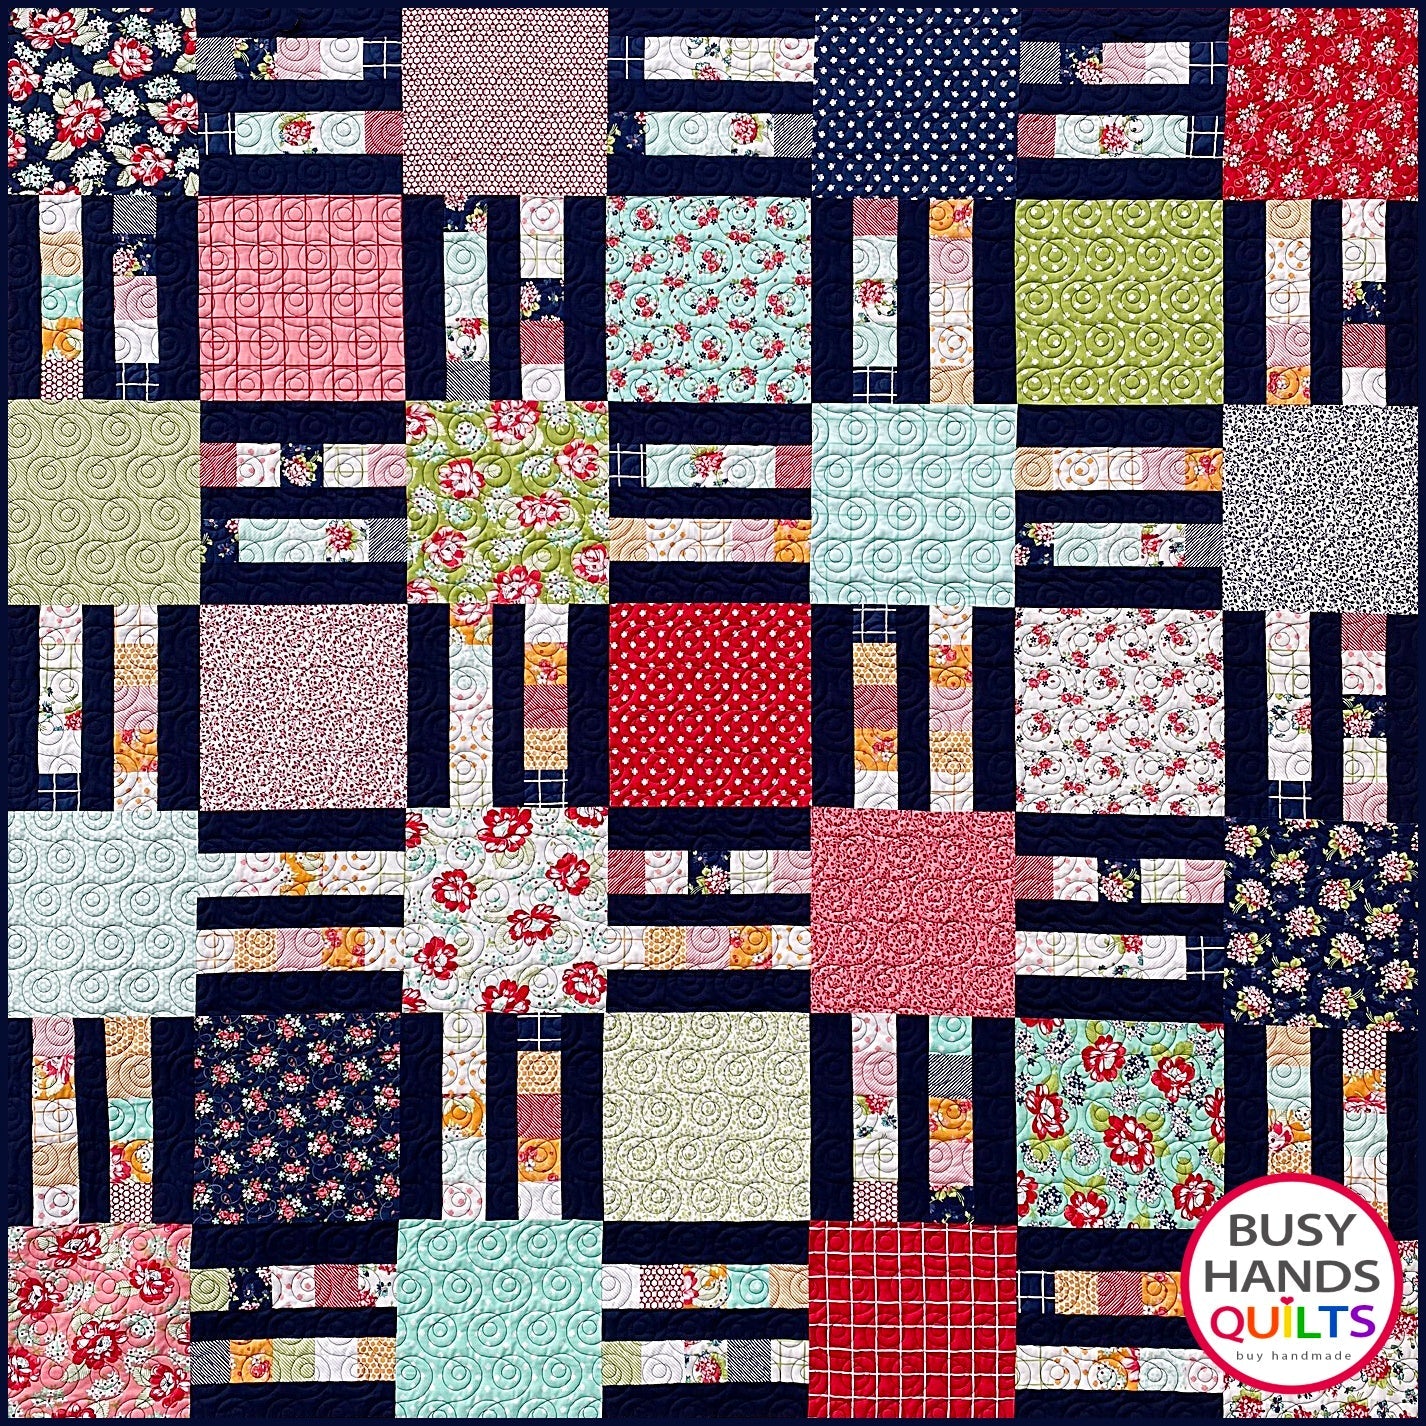 Picket Fence Quilt Pattern PDF DOWNLOAD Busy Hands Quilts $12.99